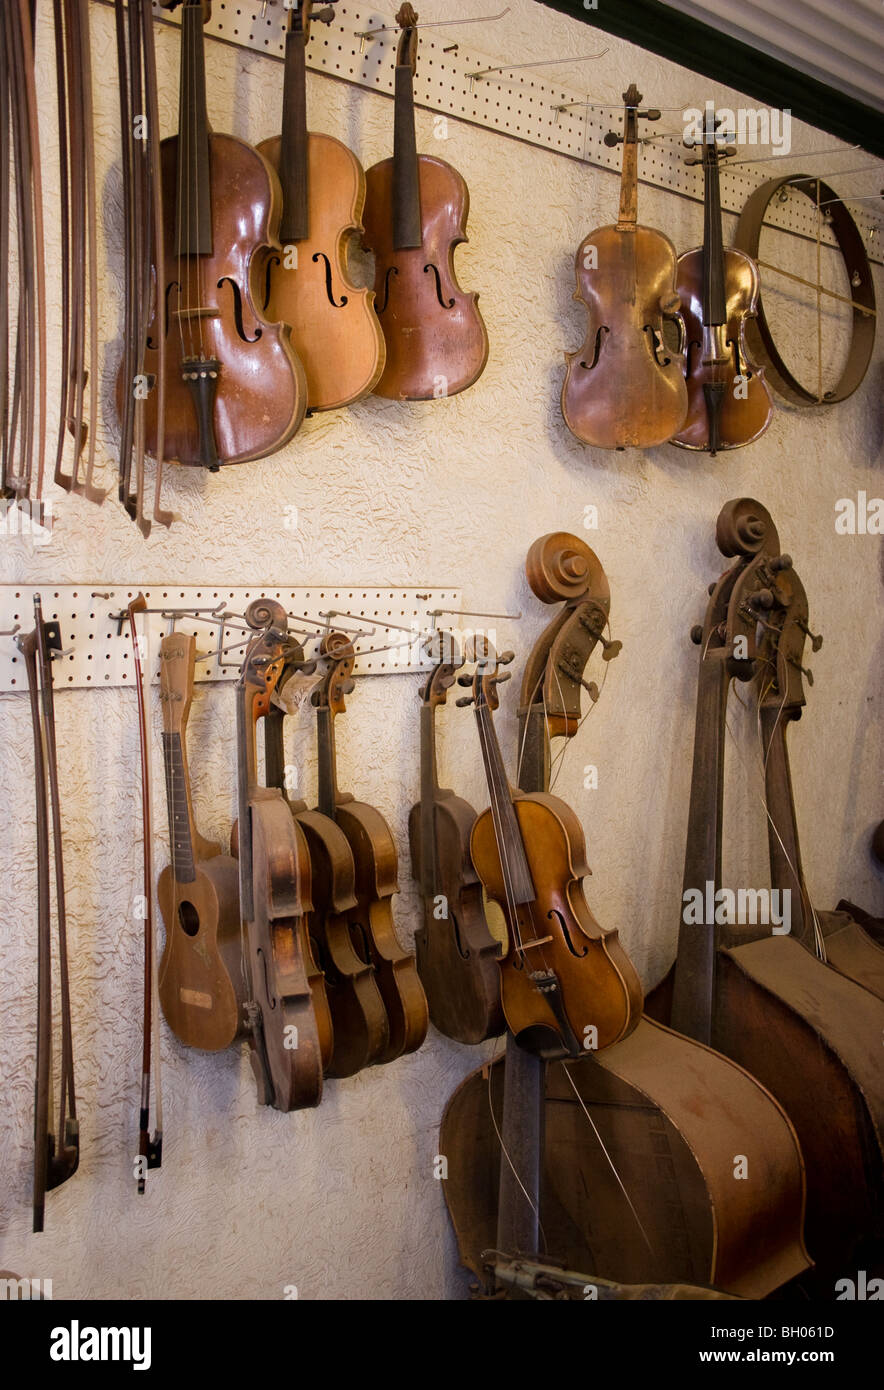 Violins hang in a luthier's shop. Stock Photo